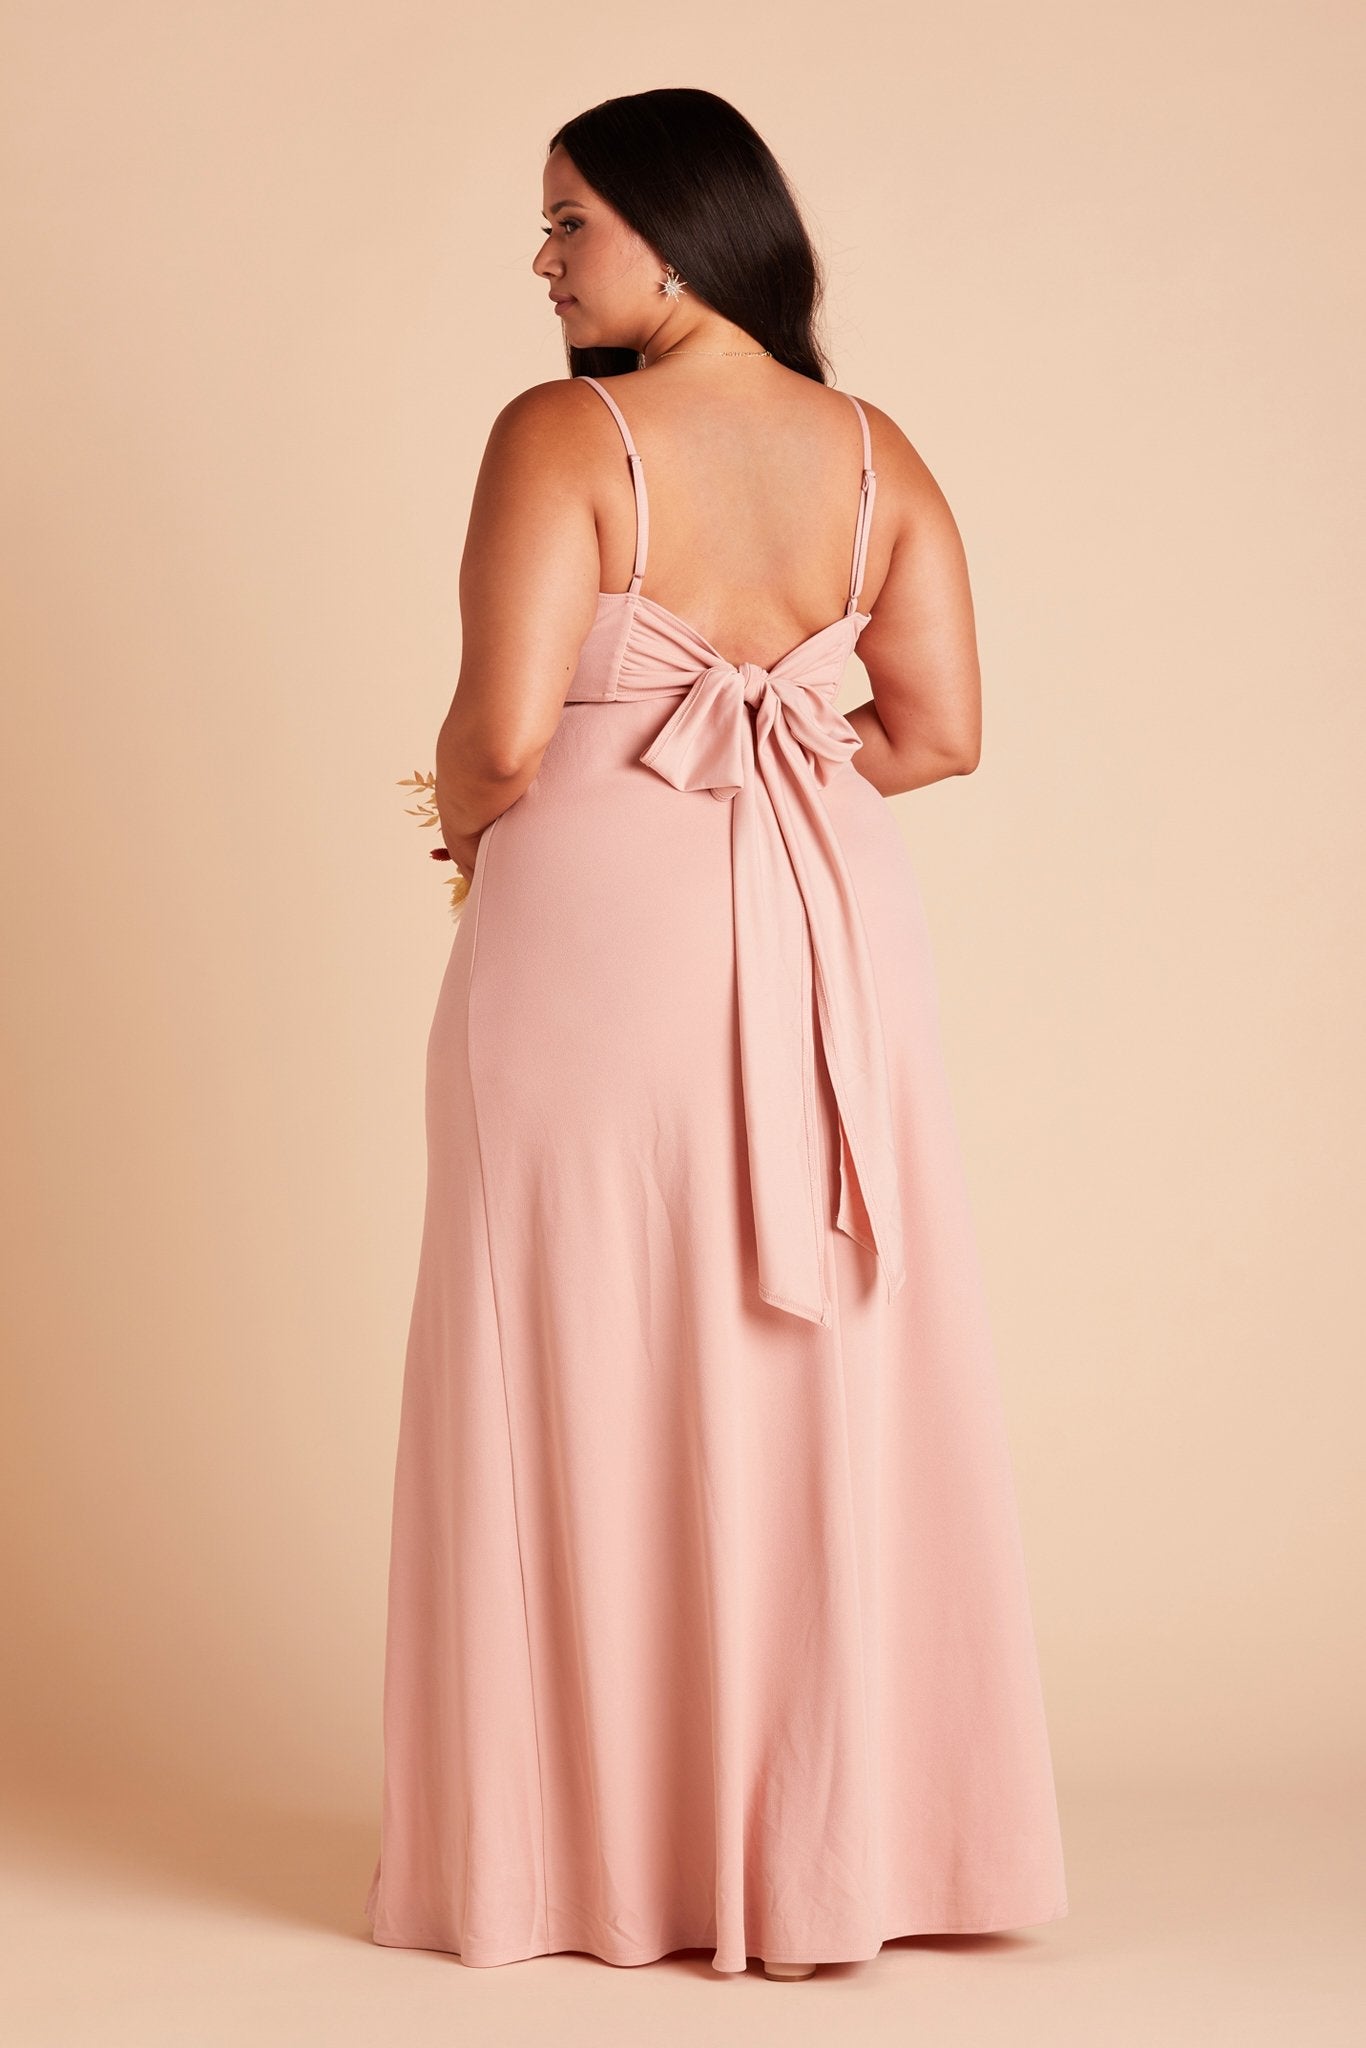 Benny plus size bridesmaid dress in dusty rose crepe by Birdy Grey, back view